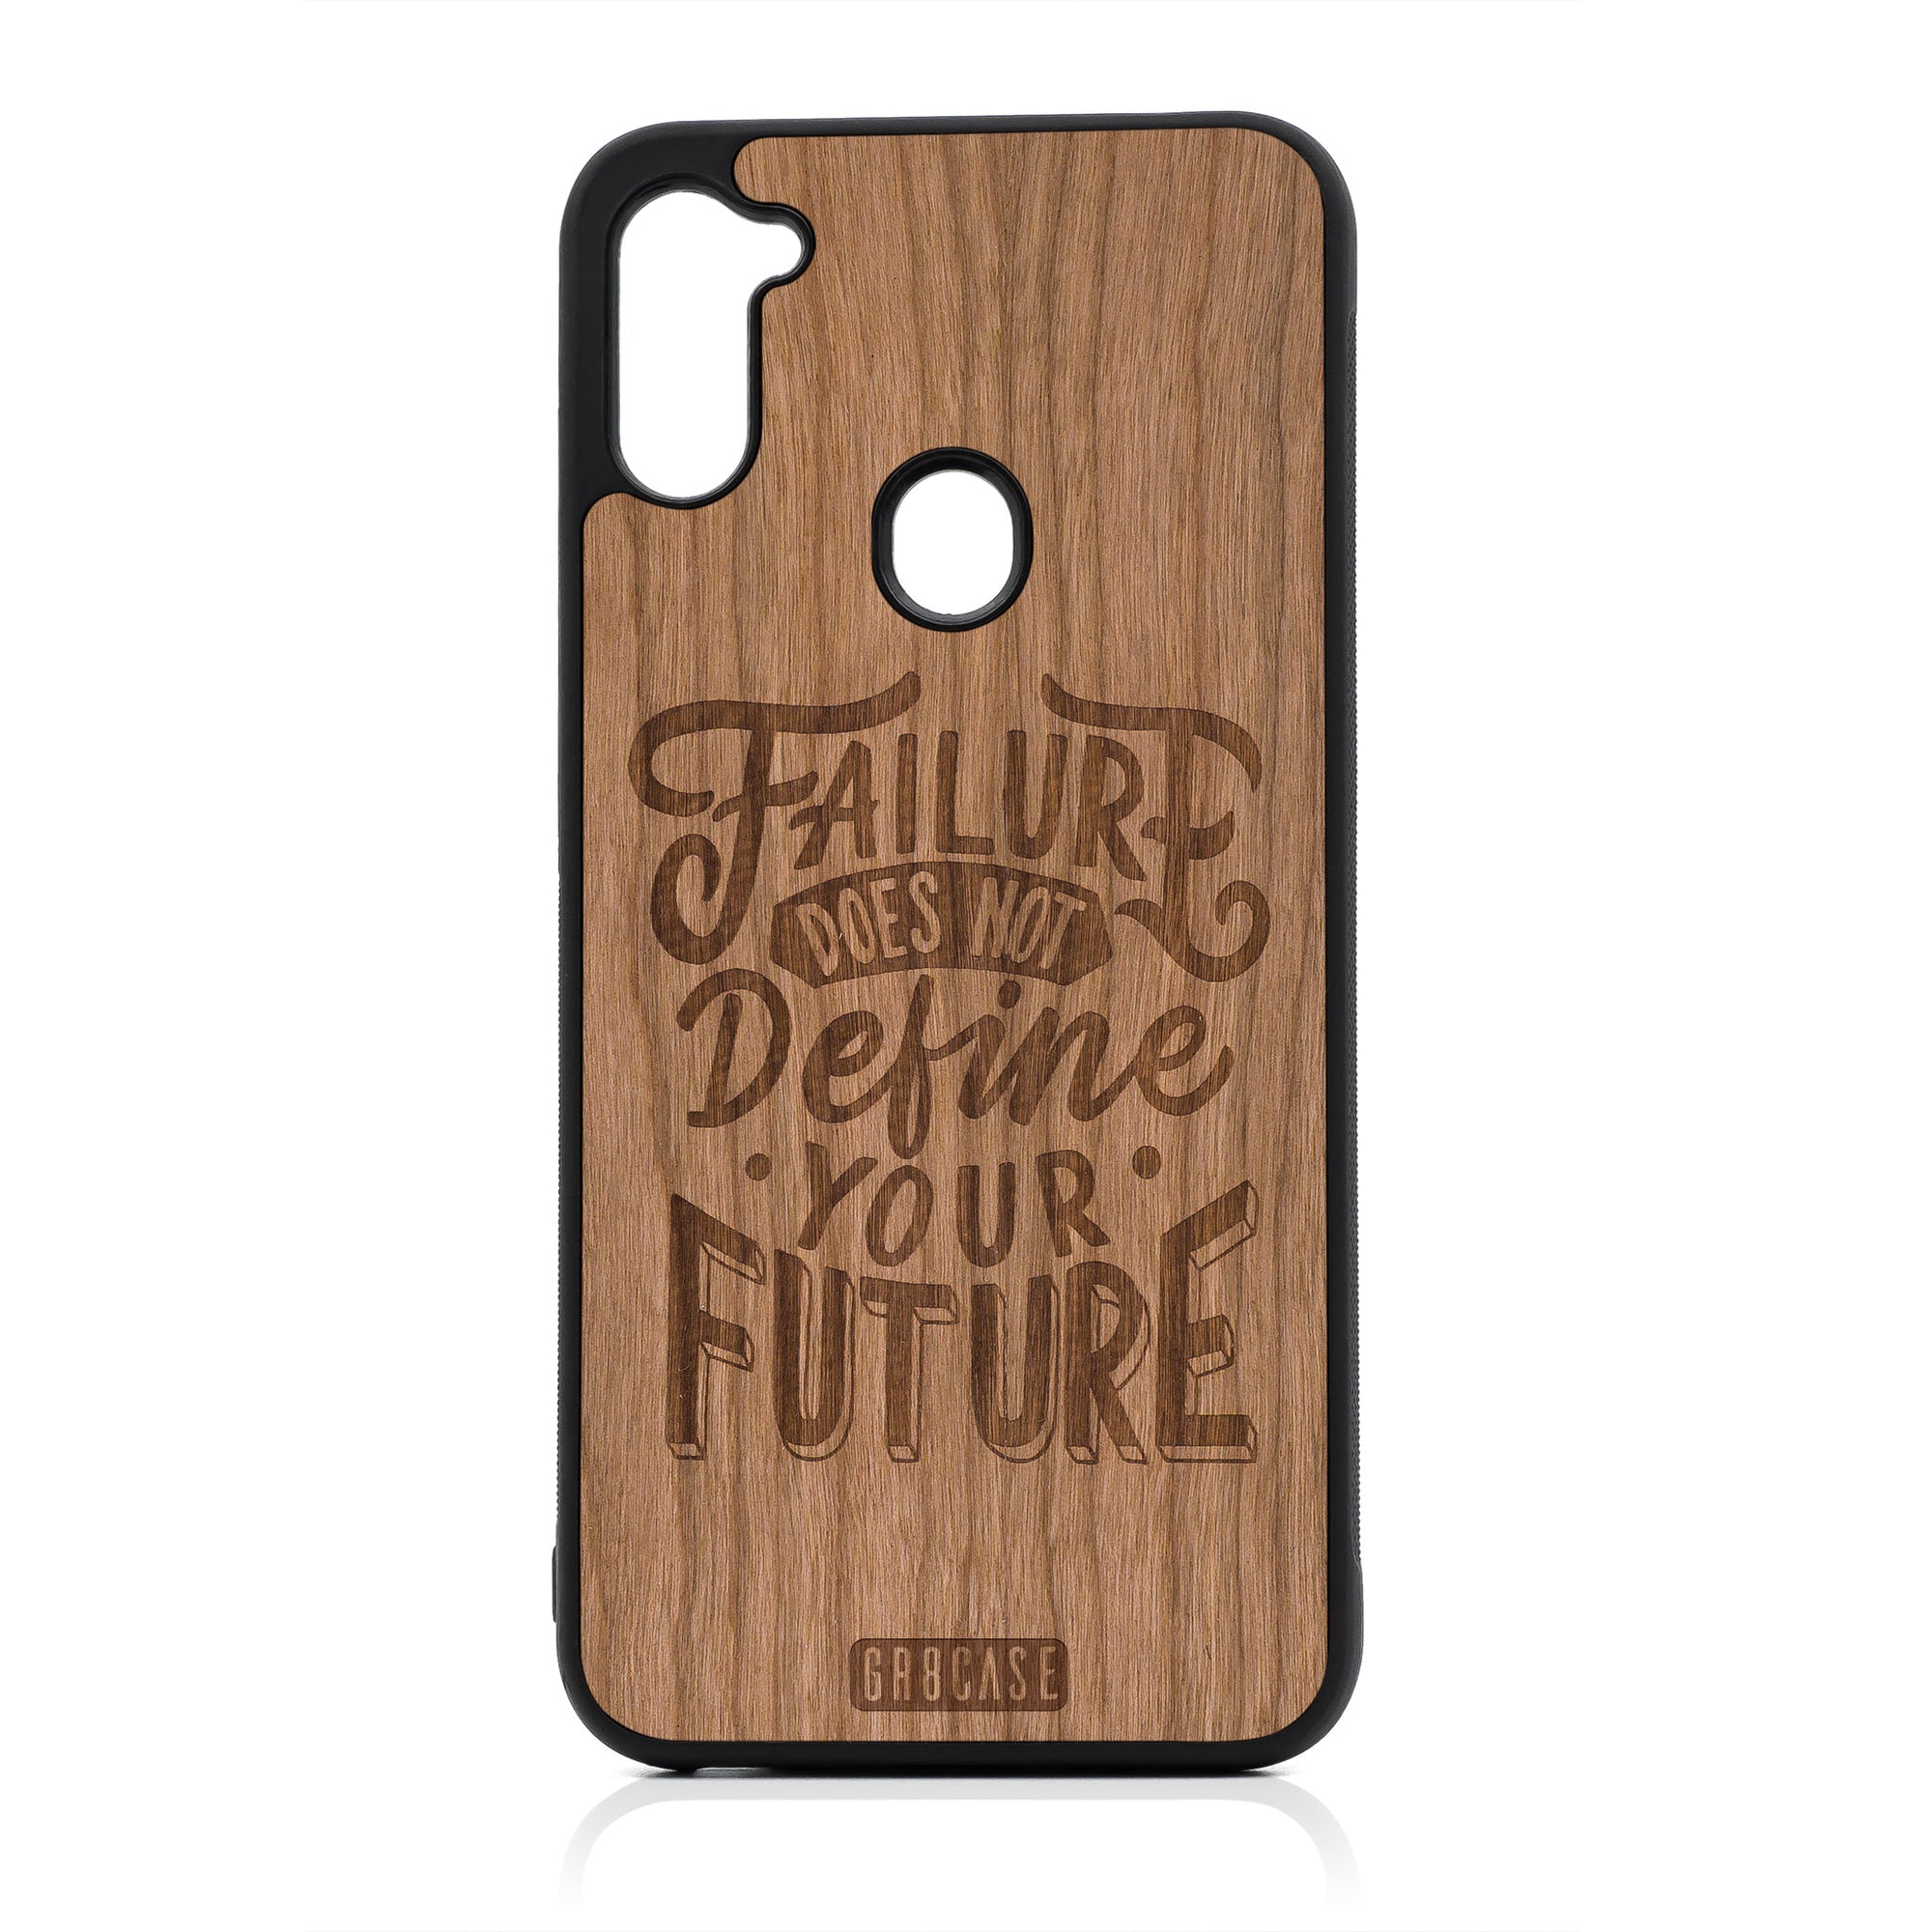 Failure Does Not Define You Future Design Wood Case For Samsung Galaxy A11